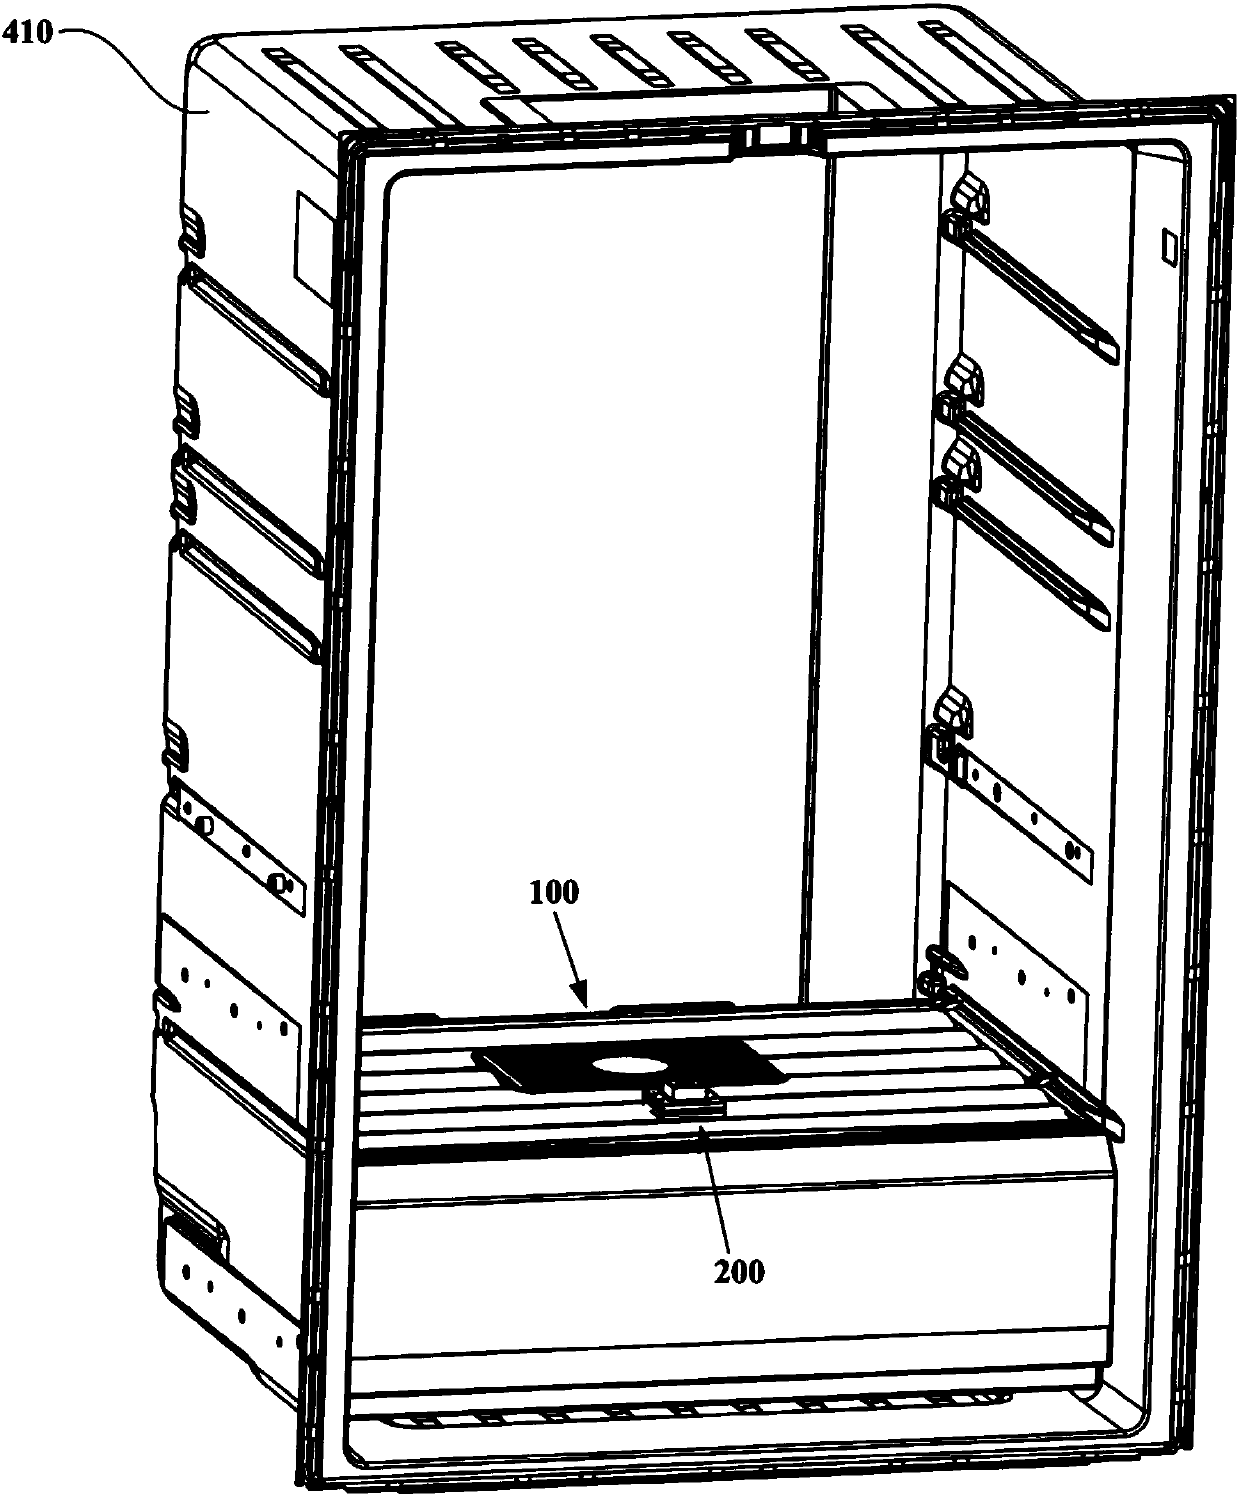 Refrigerating device for cold storage